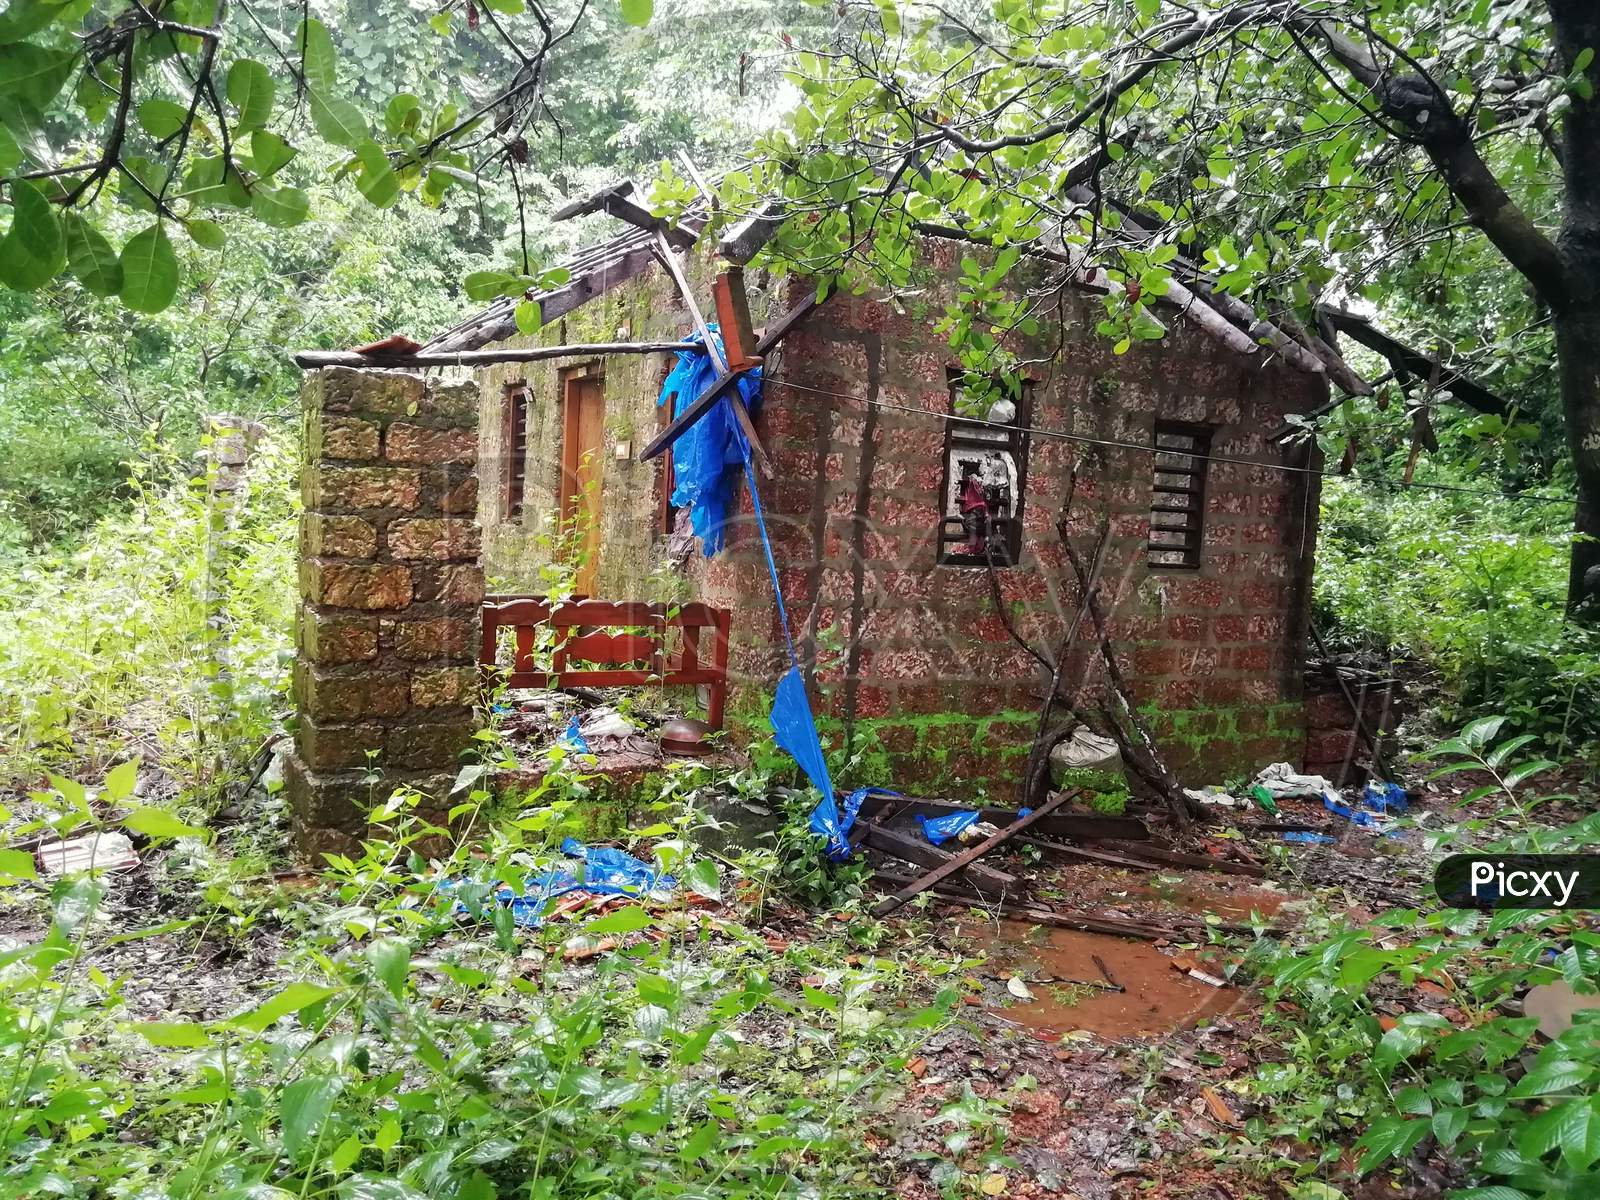 A house ruined by a natural disaster Kerala India